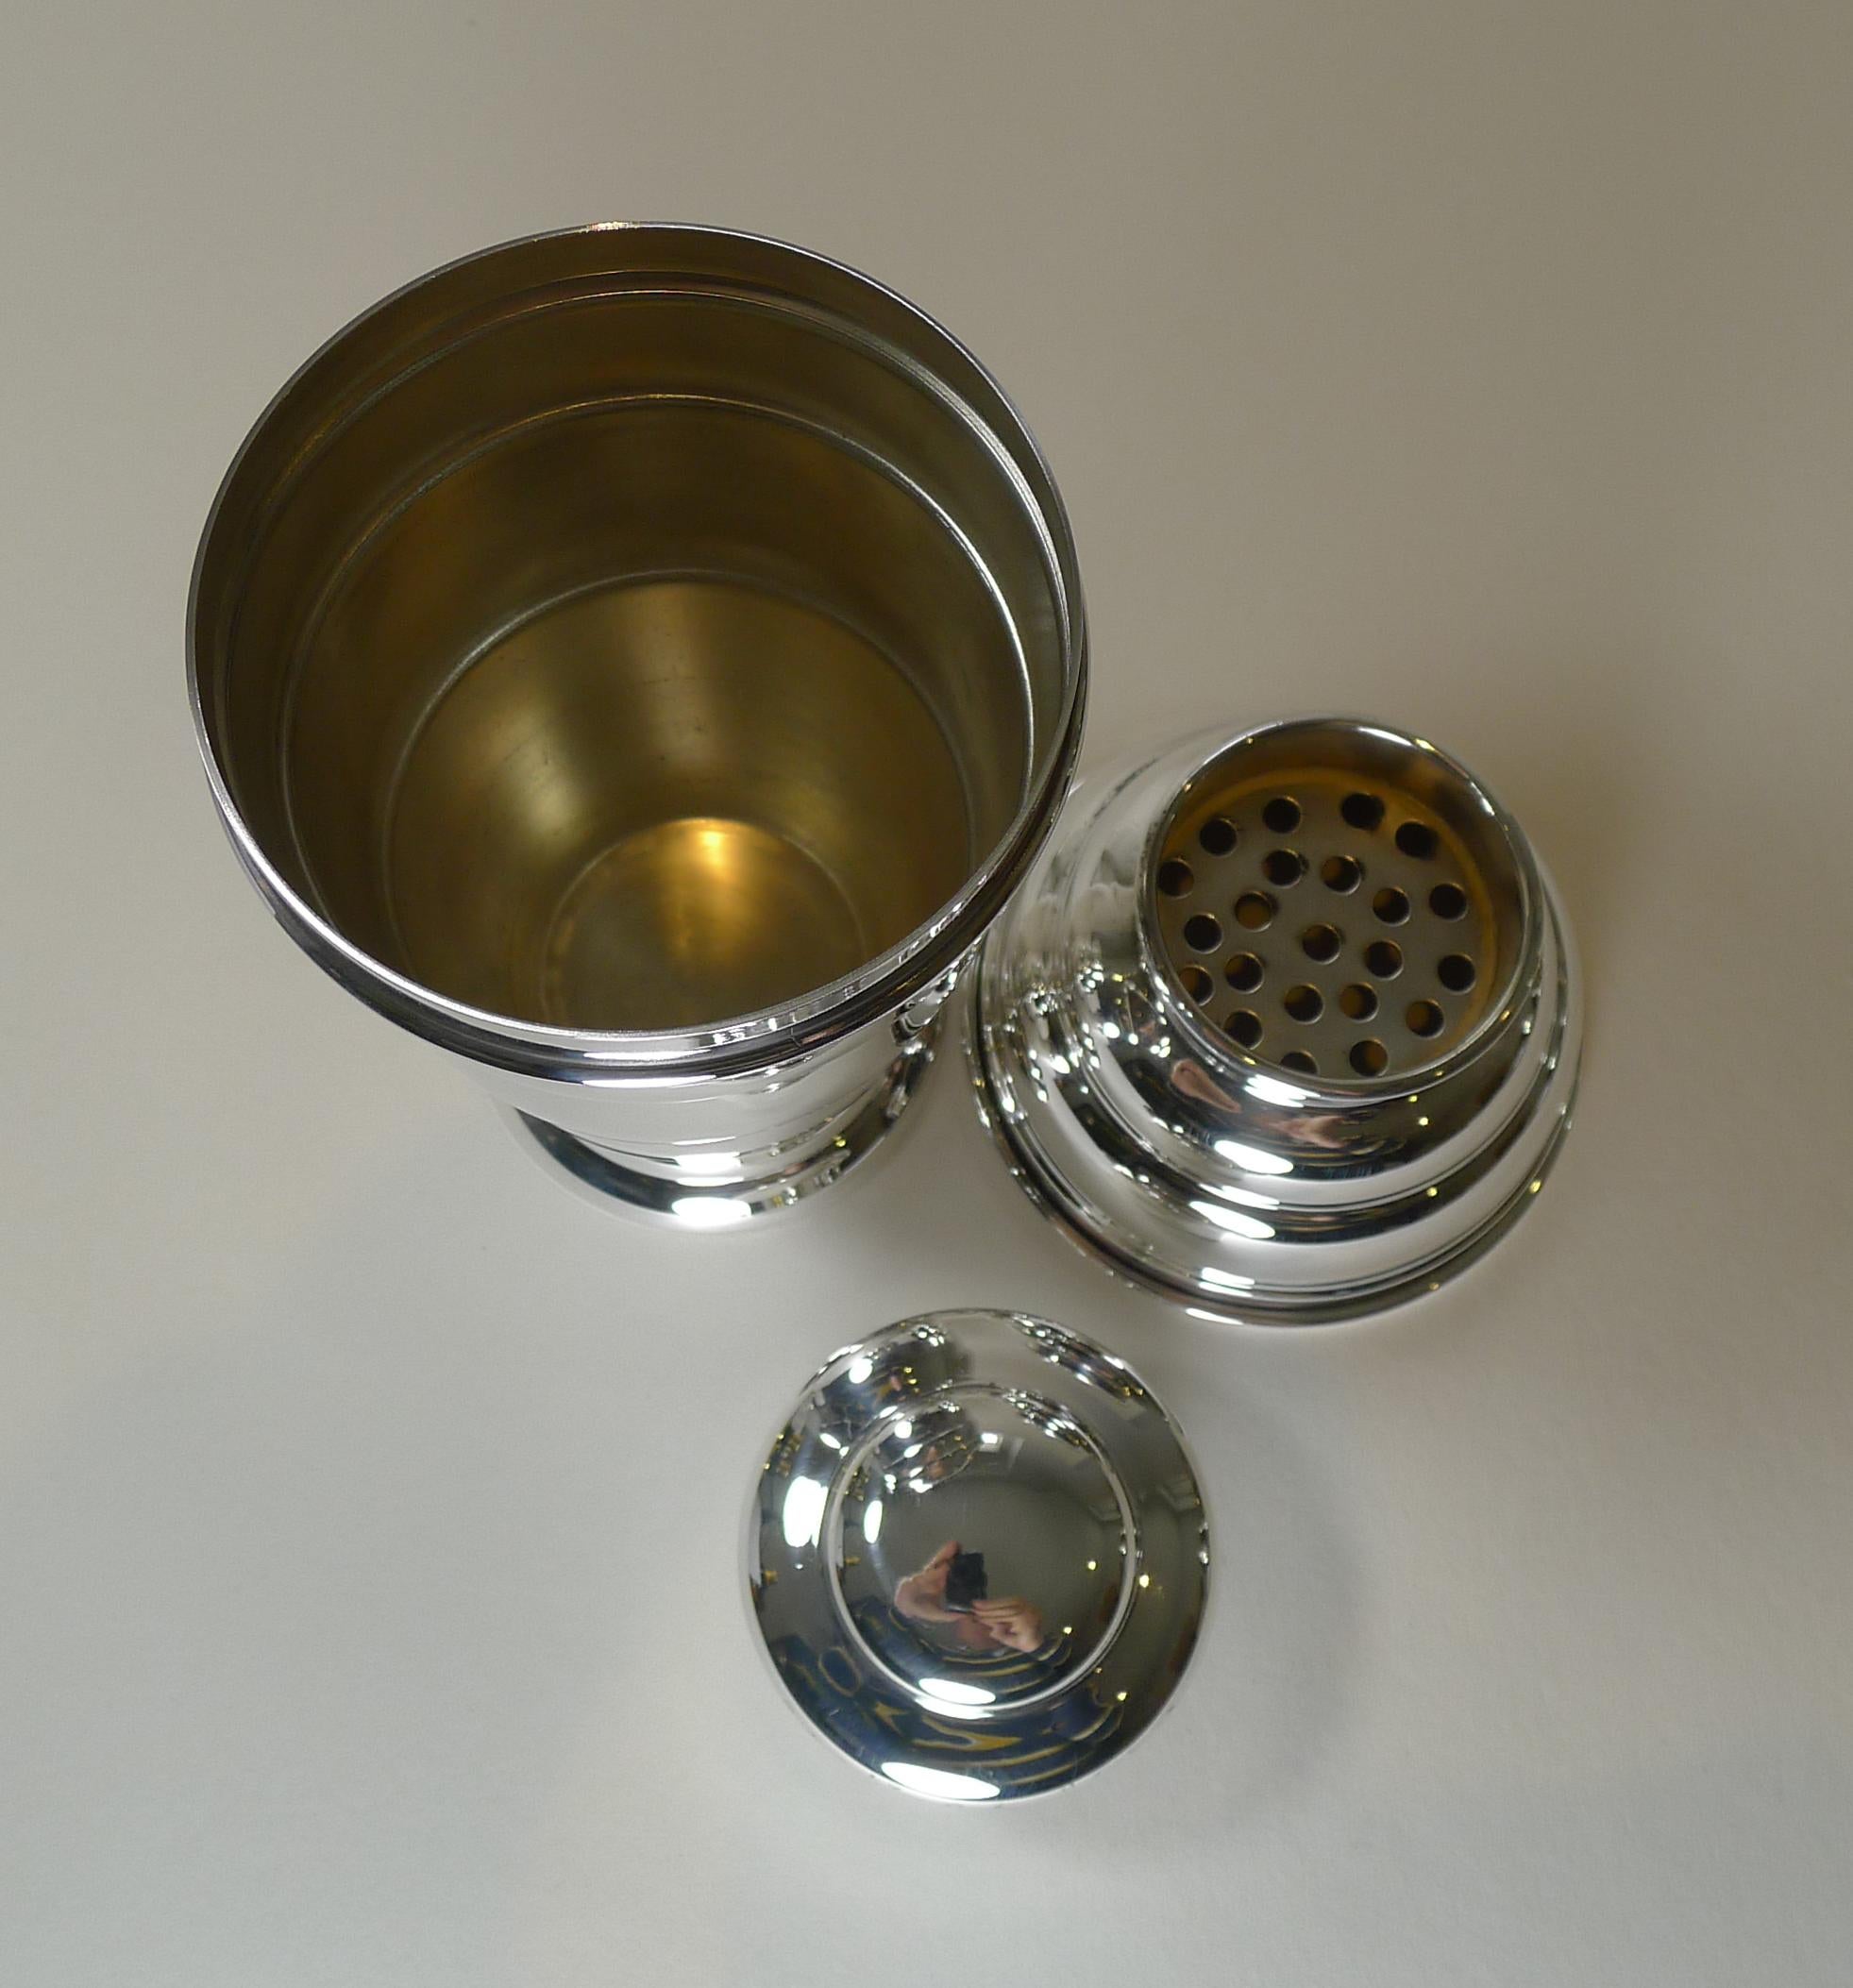 English Art Deco Cocktail Shaker c.1930, Silver Plate 3